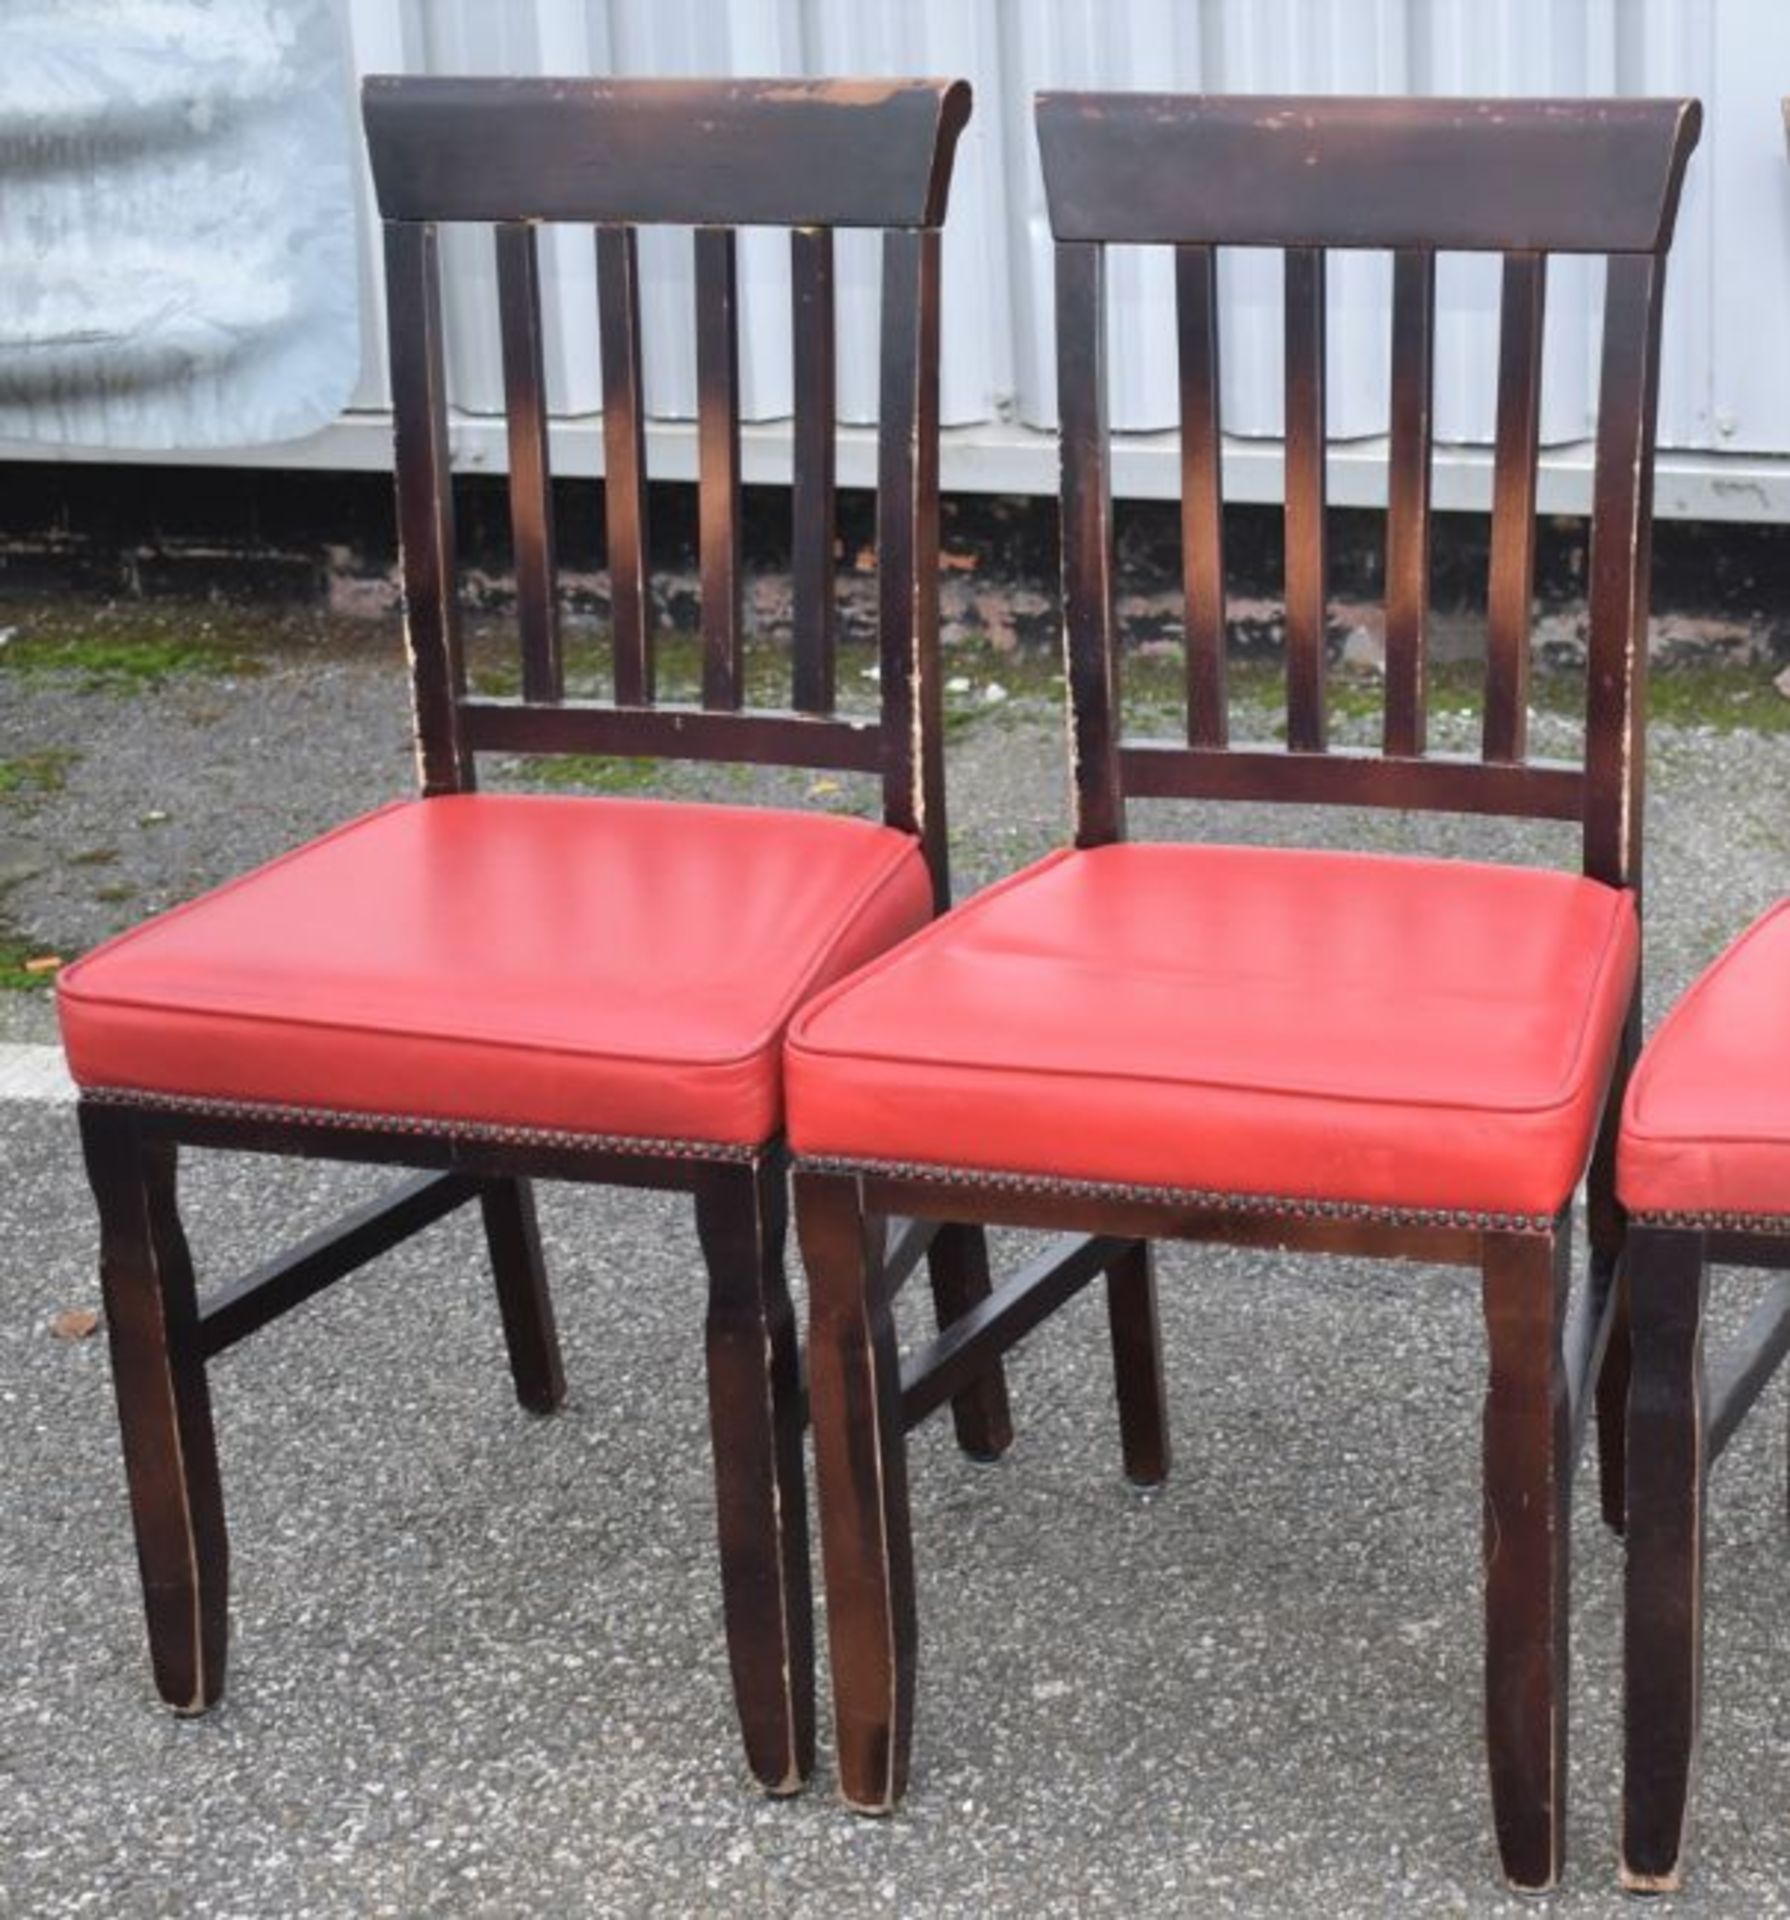 16 x Restaurant Dining Chairs With Dark Stained Wood Finish and Red Leather Seat Pads - Recently - Image 4 of 7